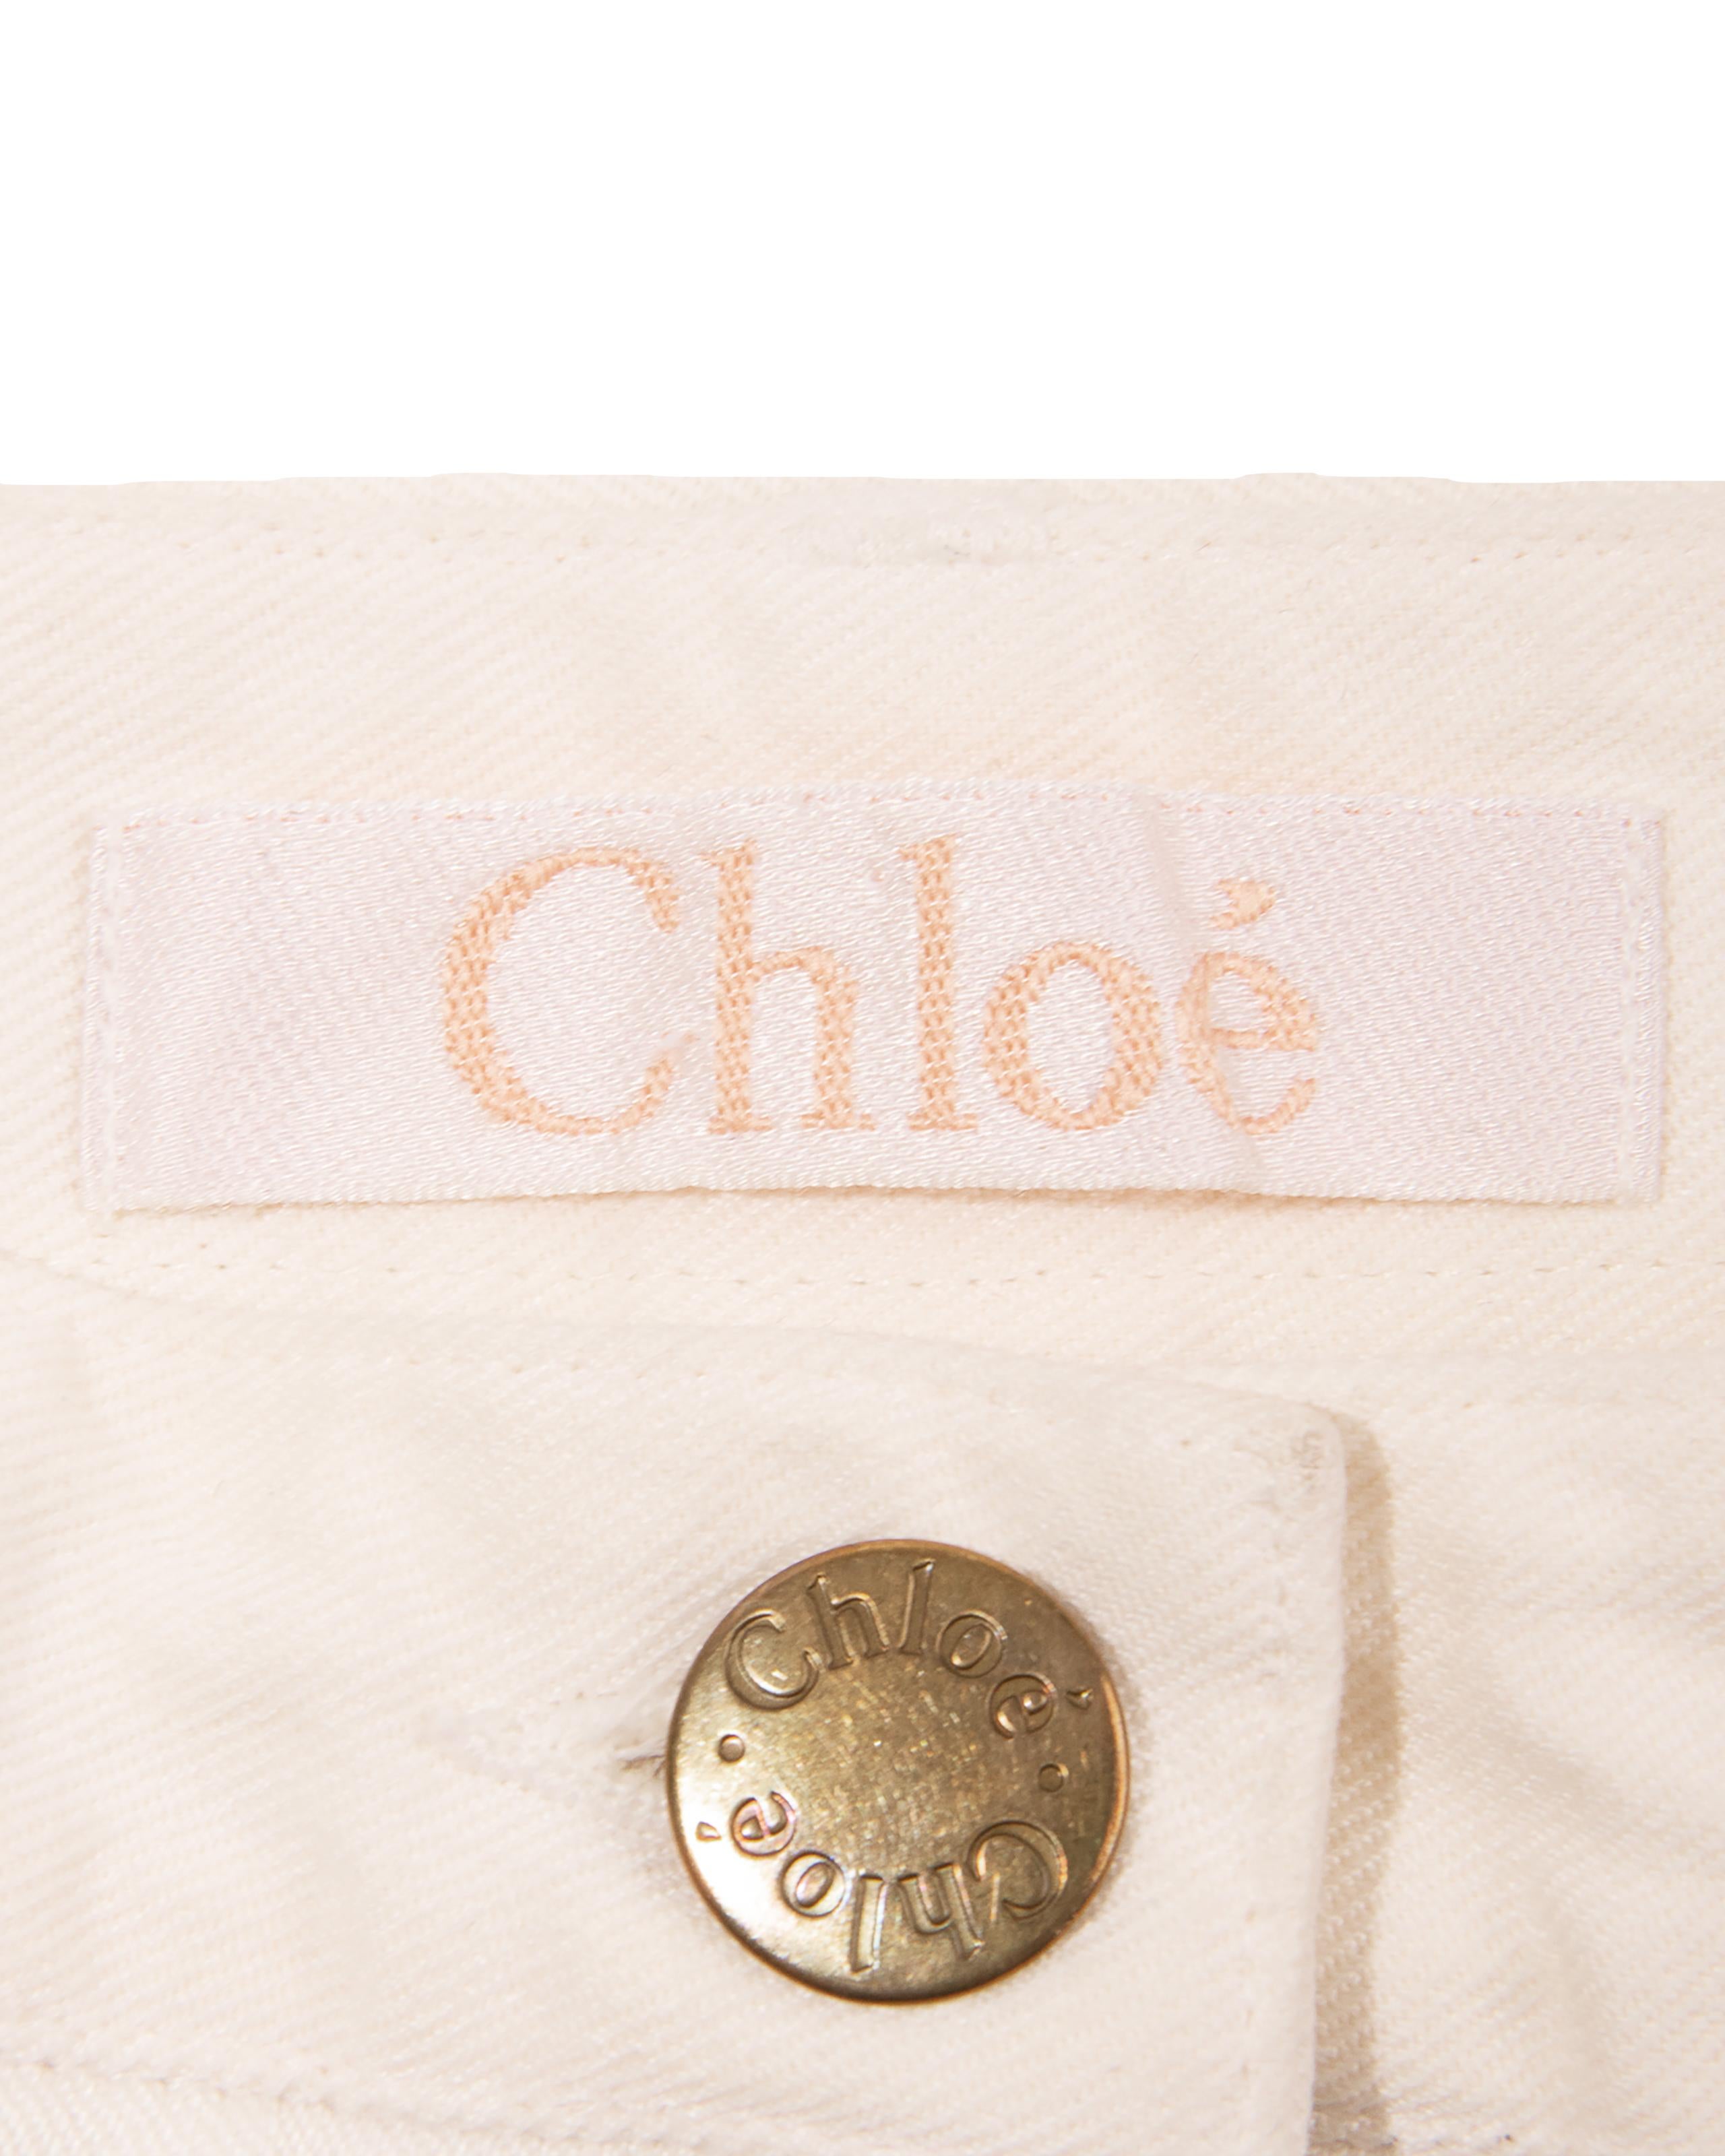 S/S 2000 Chloe by Stella McCartney Cream Jeans with Embroidered Animals 3